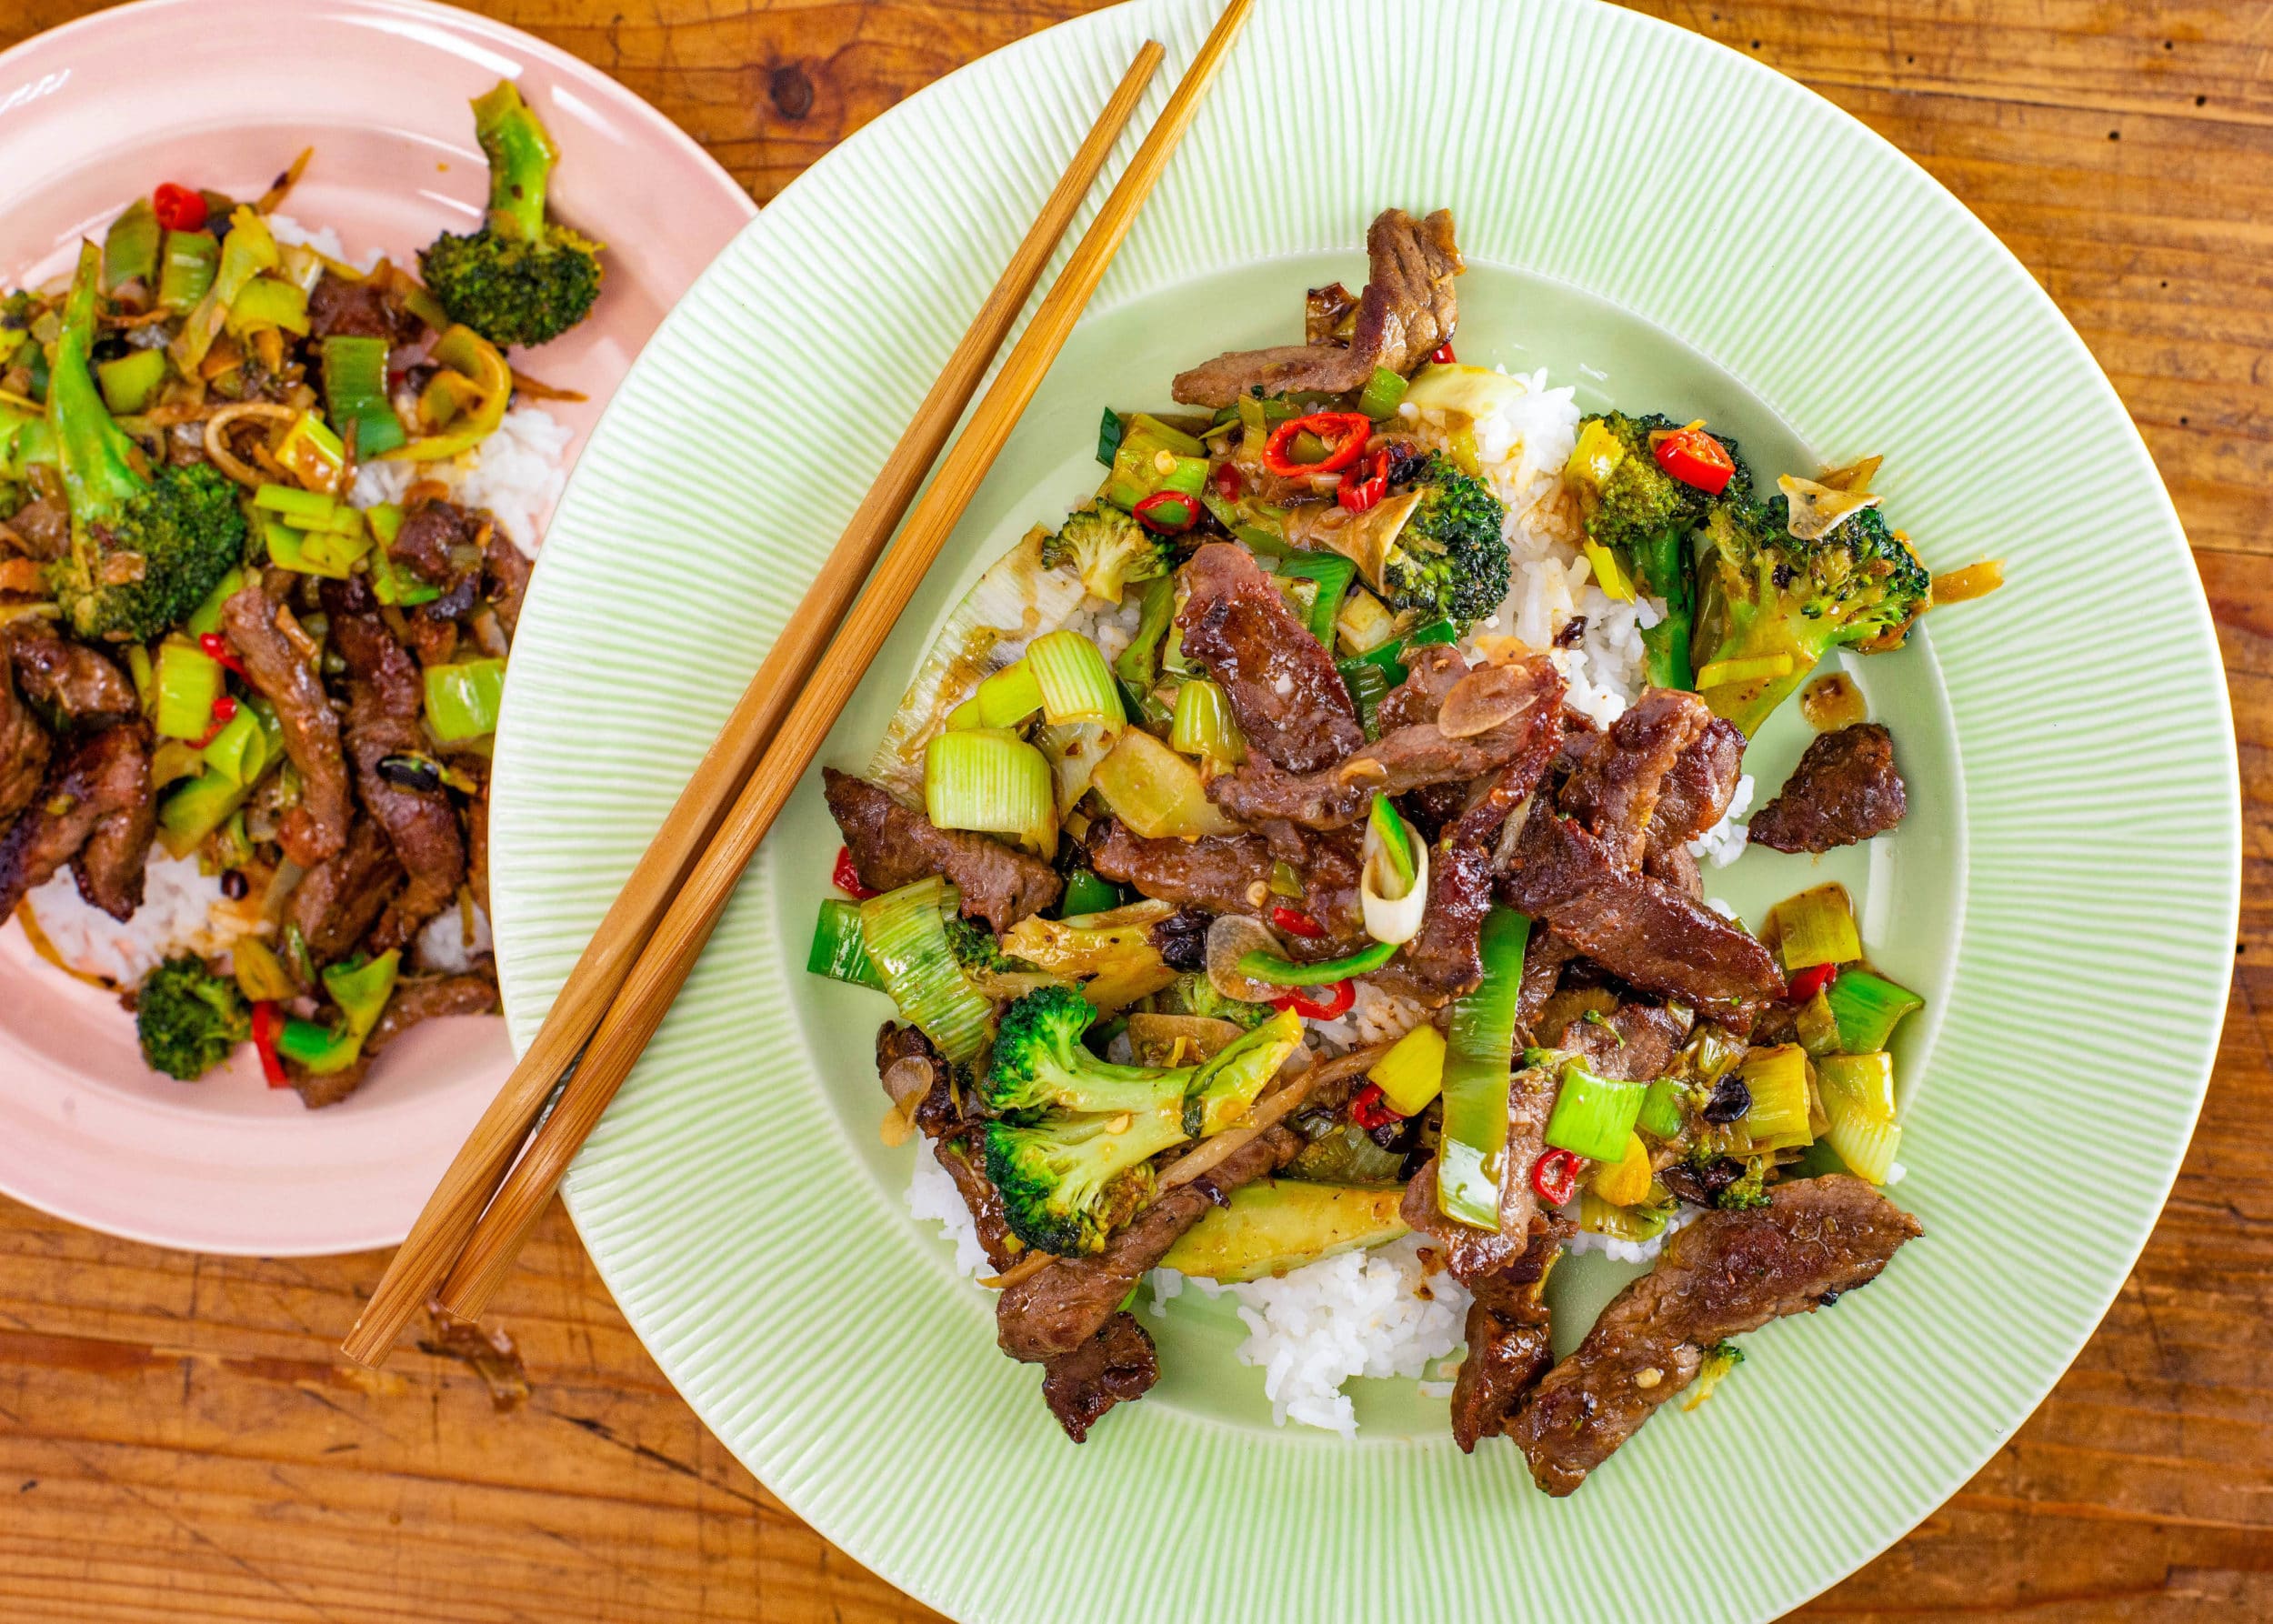 Rachael's Chinese Beef and Broccoli with Black Bean Sauce